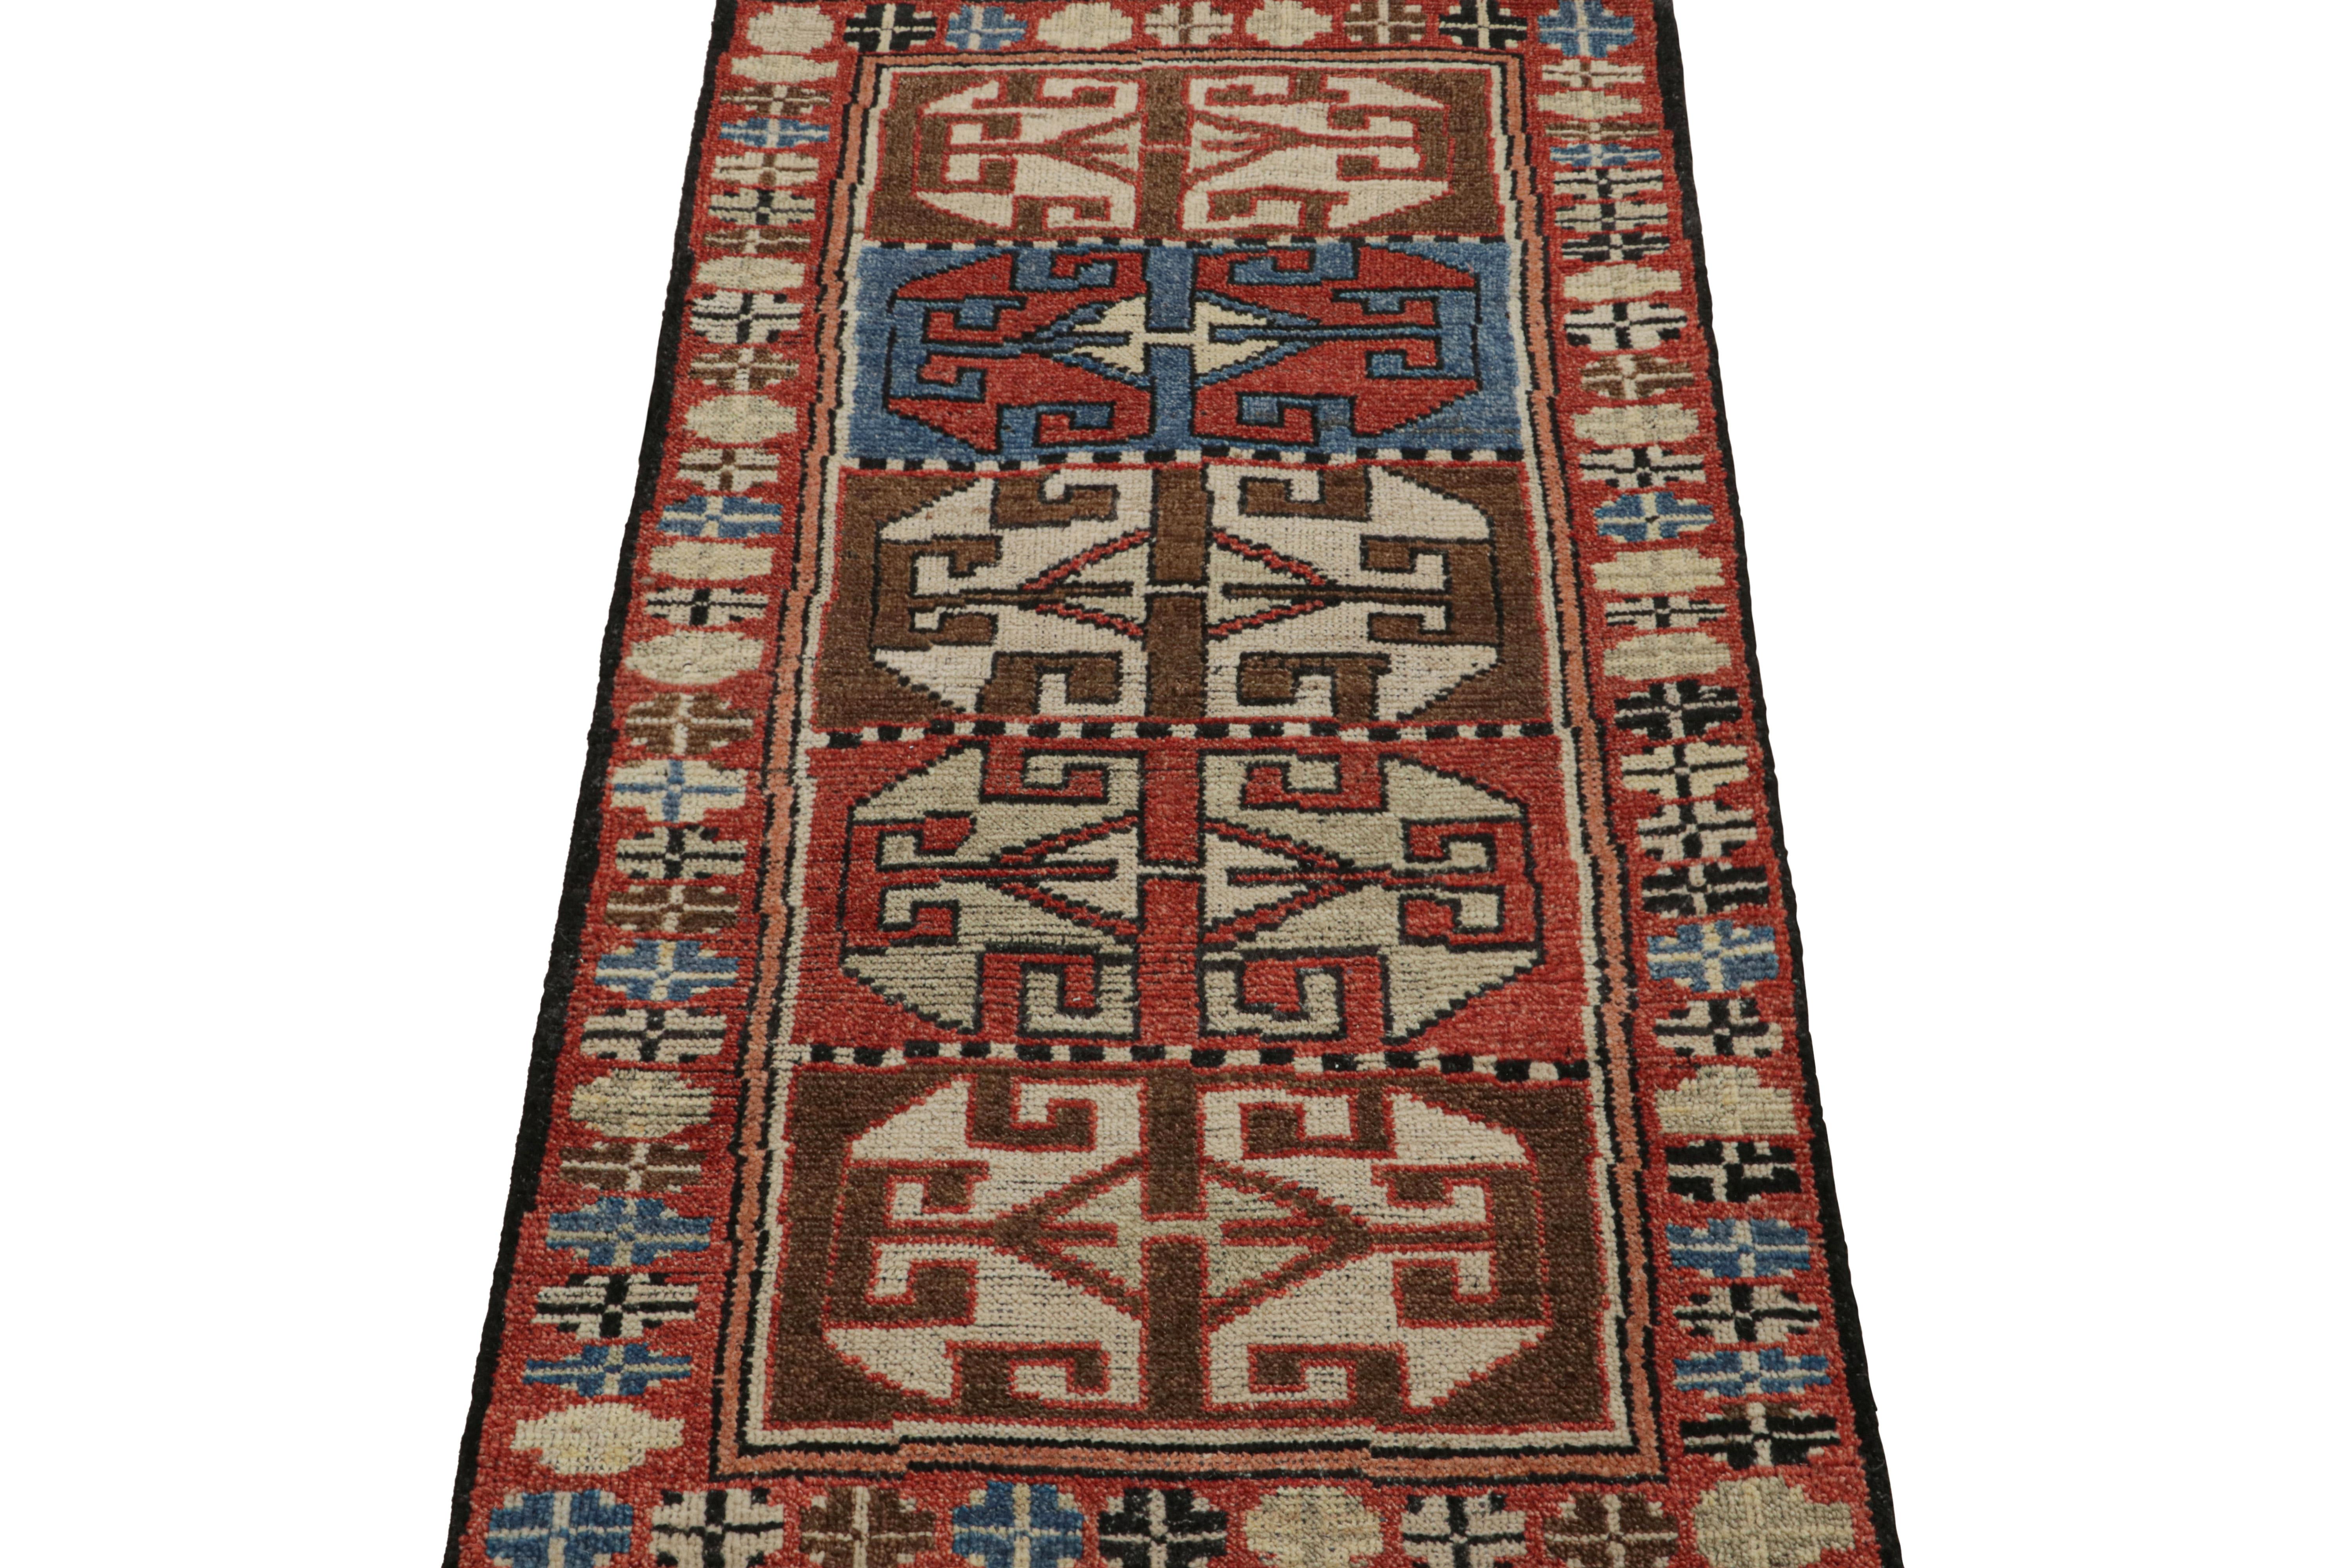 This 2x4 rug is a grand new entry to Rug & Kilim’s custom classics Burano collection. Hand-knotted in wool.

On the Design: 

This rug features geometric patterns from primitivist, nomadic motifs in rich tones of red, blue & brown. Inspired by